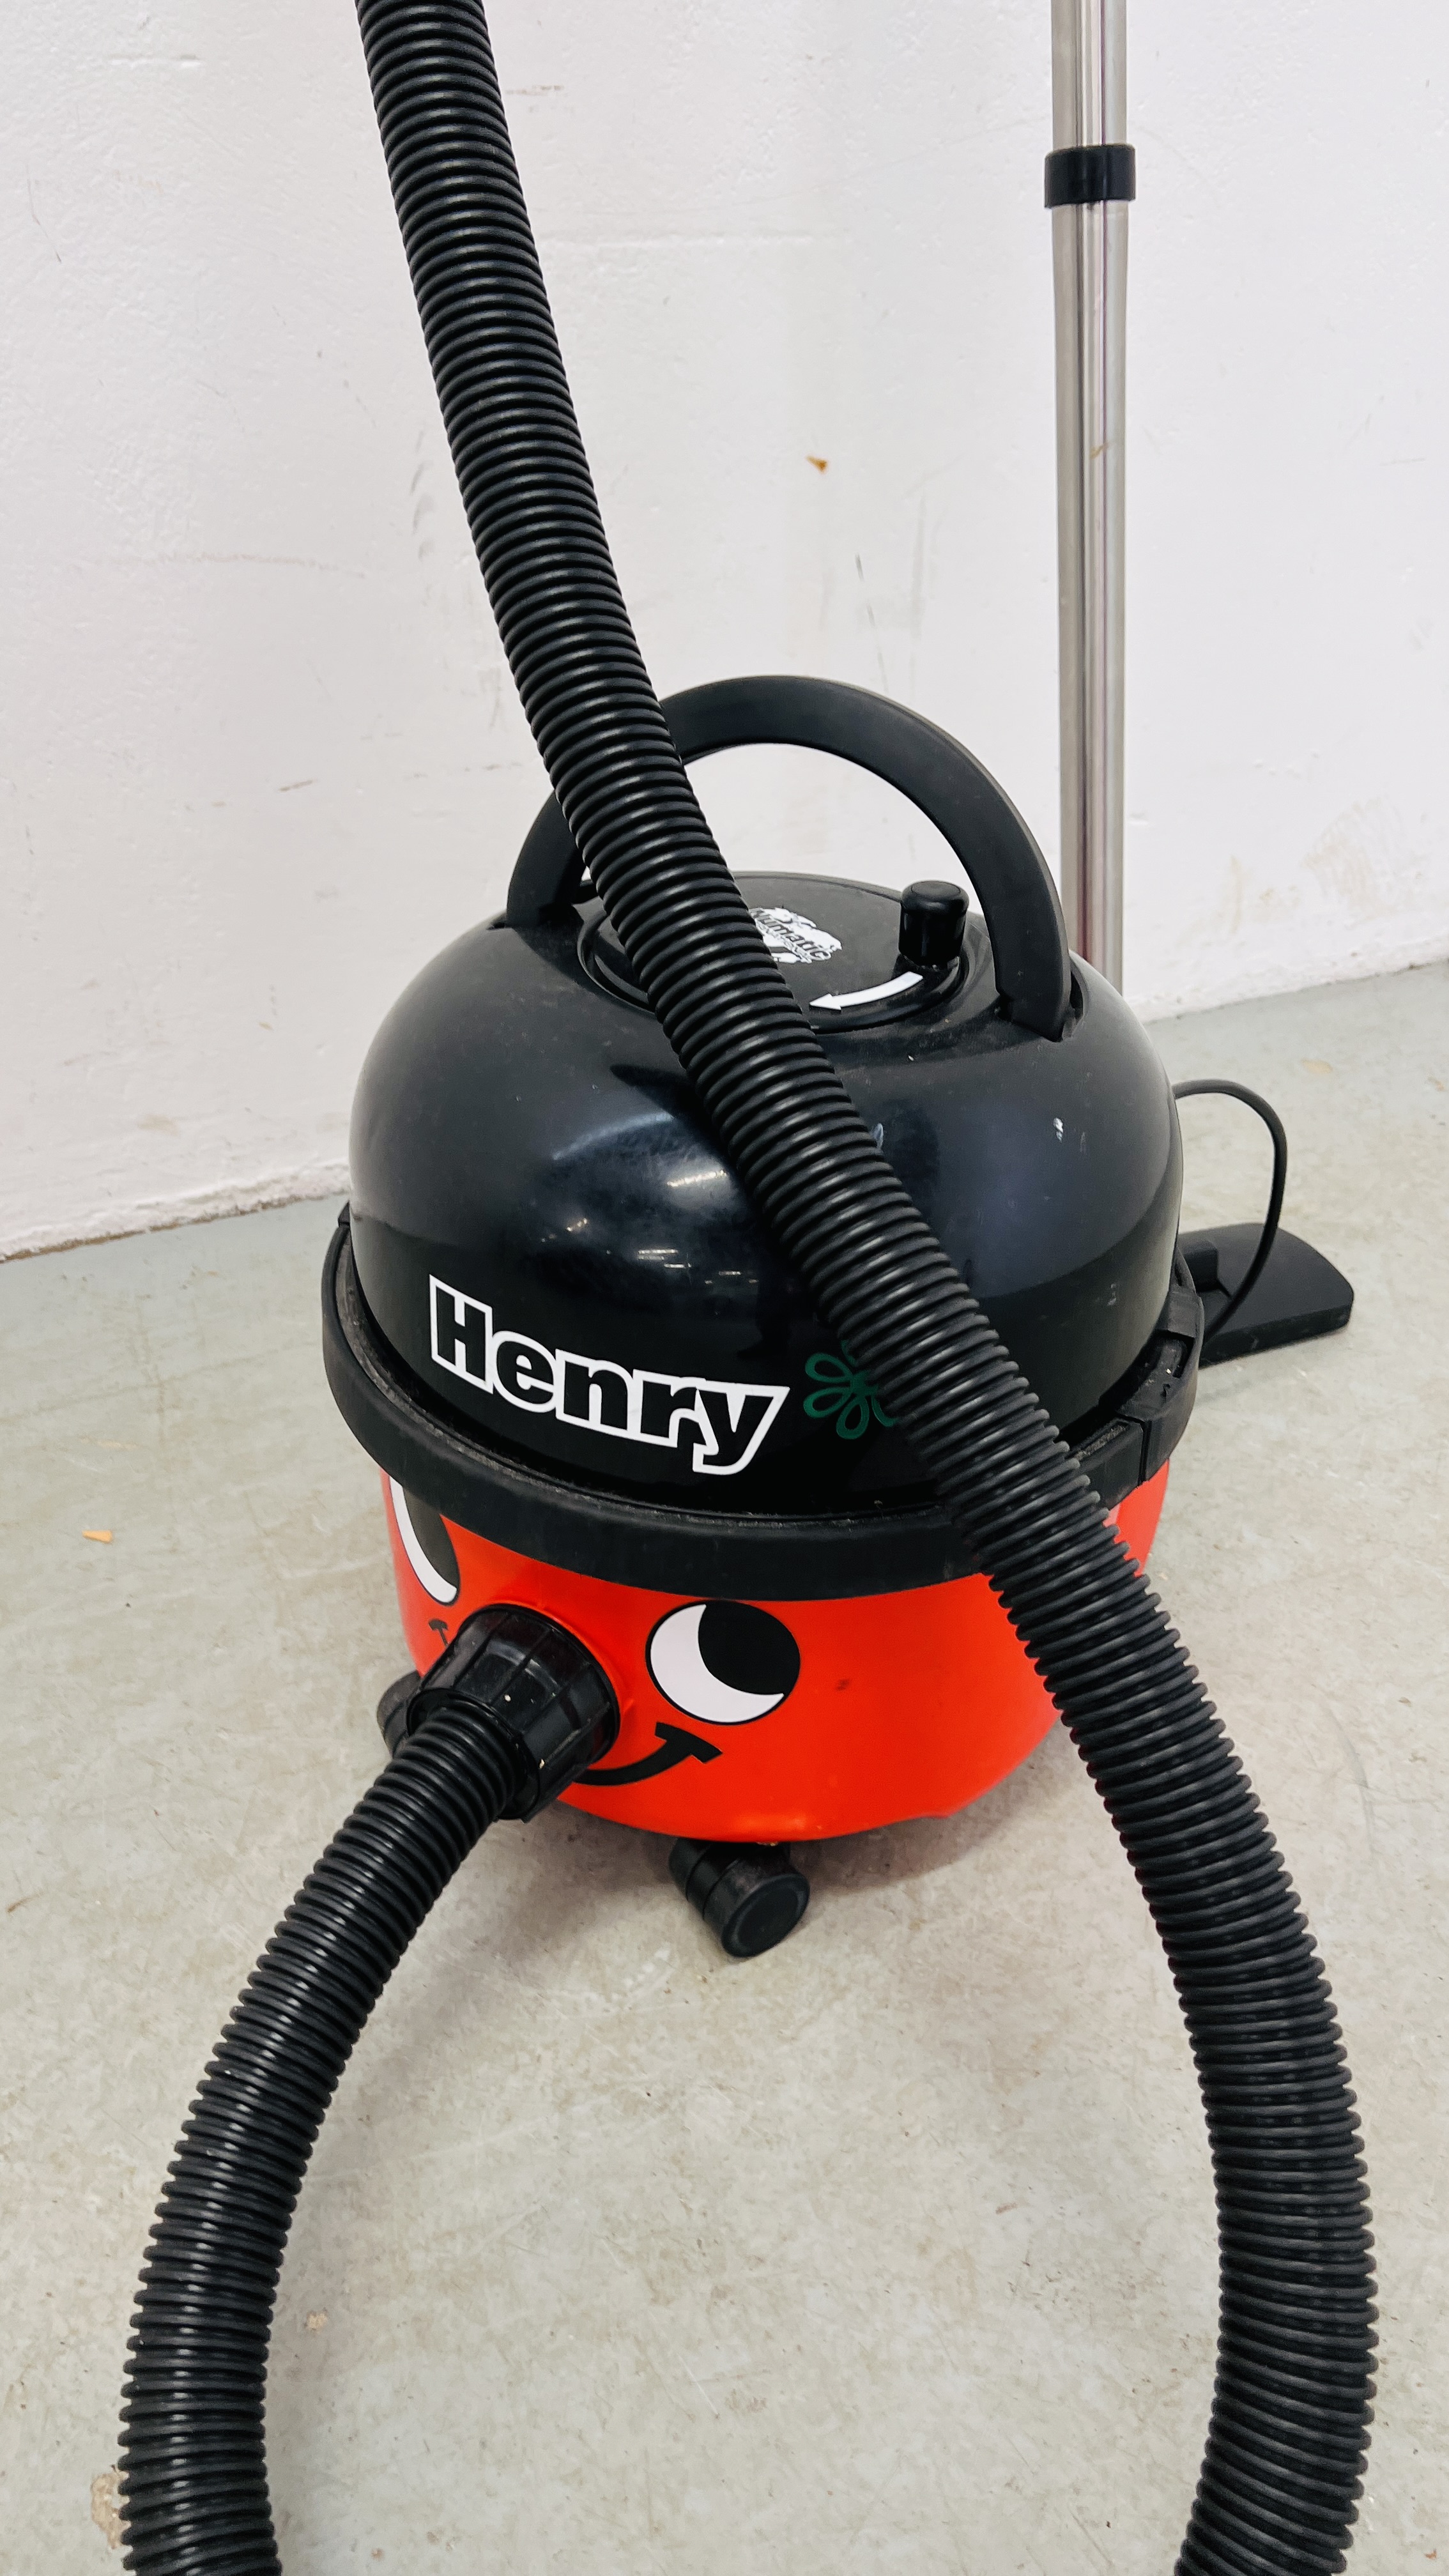 PNEUMATIC HENRY VACUUM CLEANER - SOLD AS SEEN. - Image 2 of 5